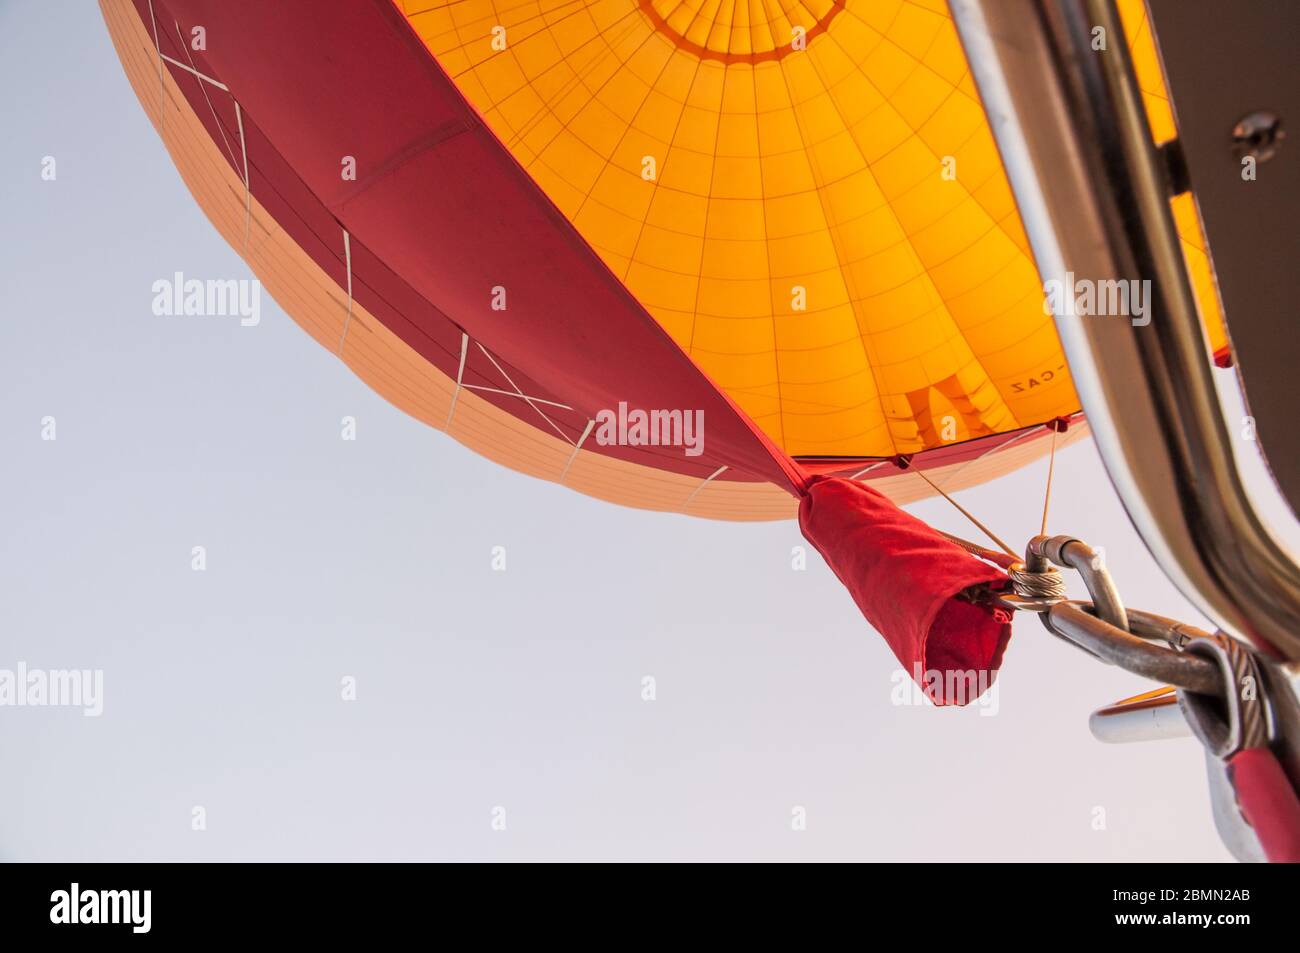 abstract inside view of a hot air ballon in morocco Stock Photo